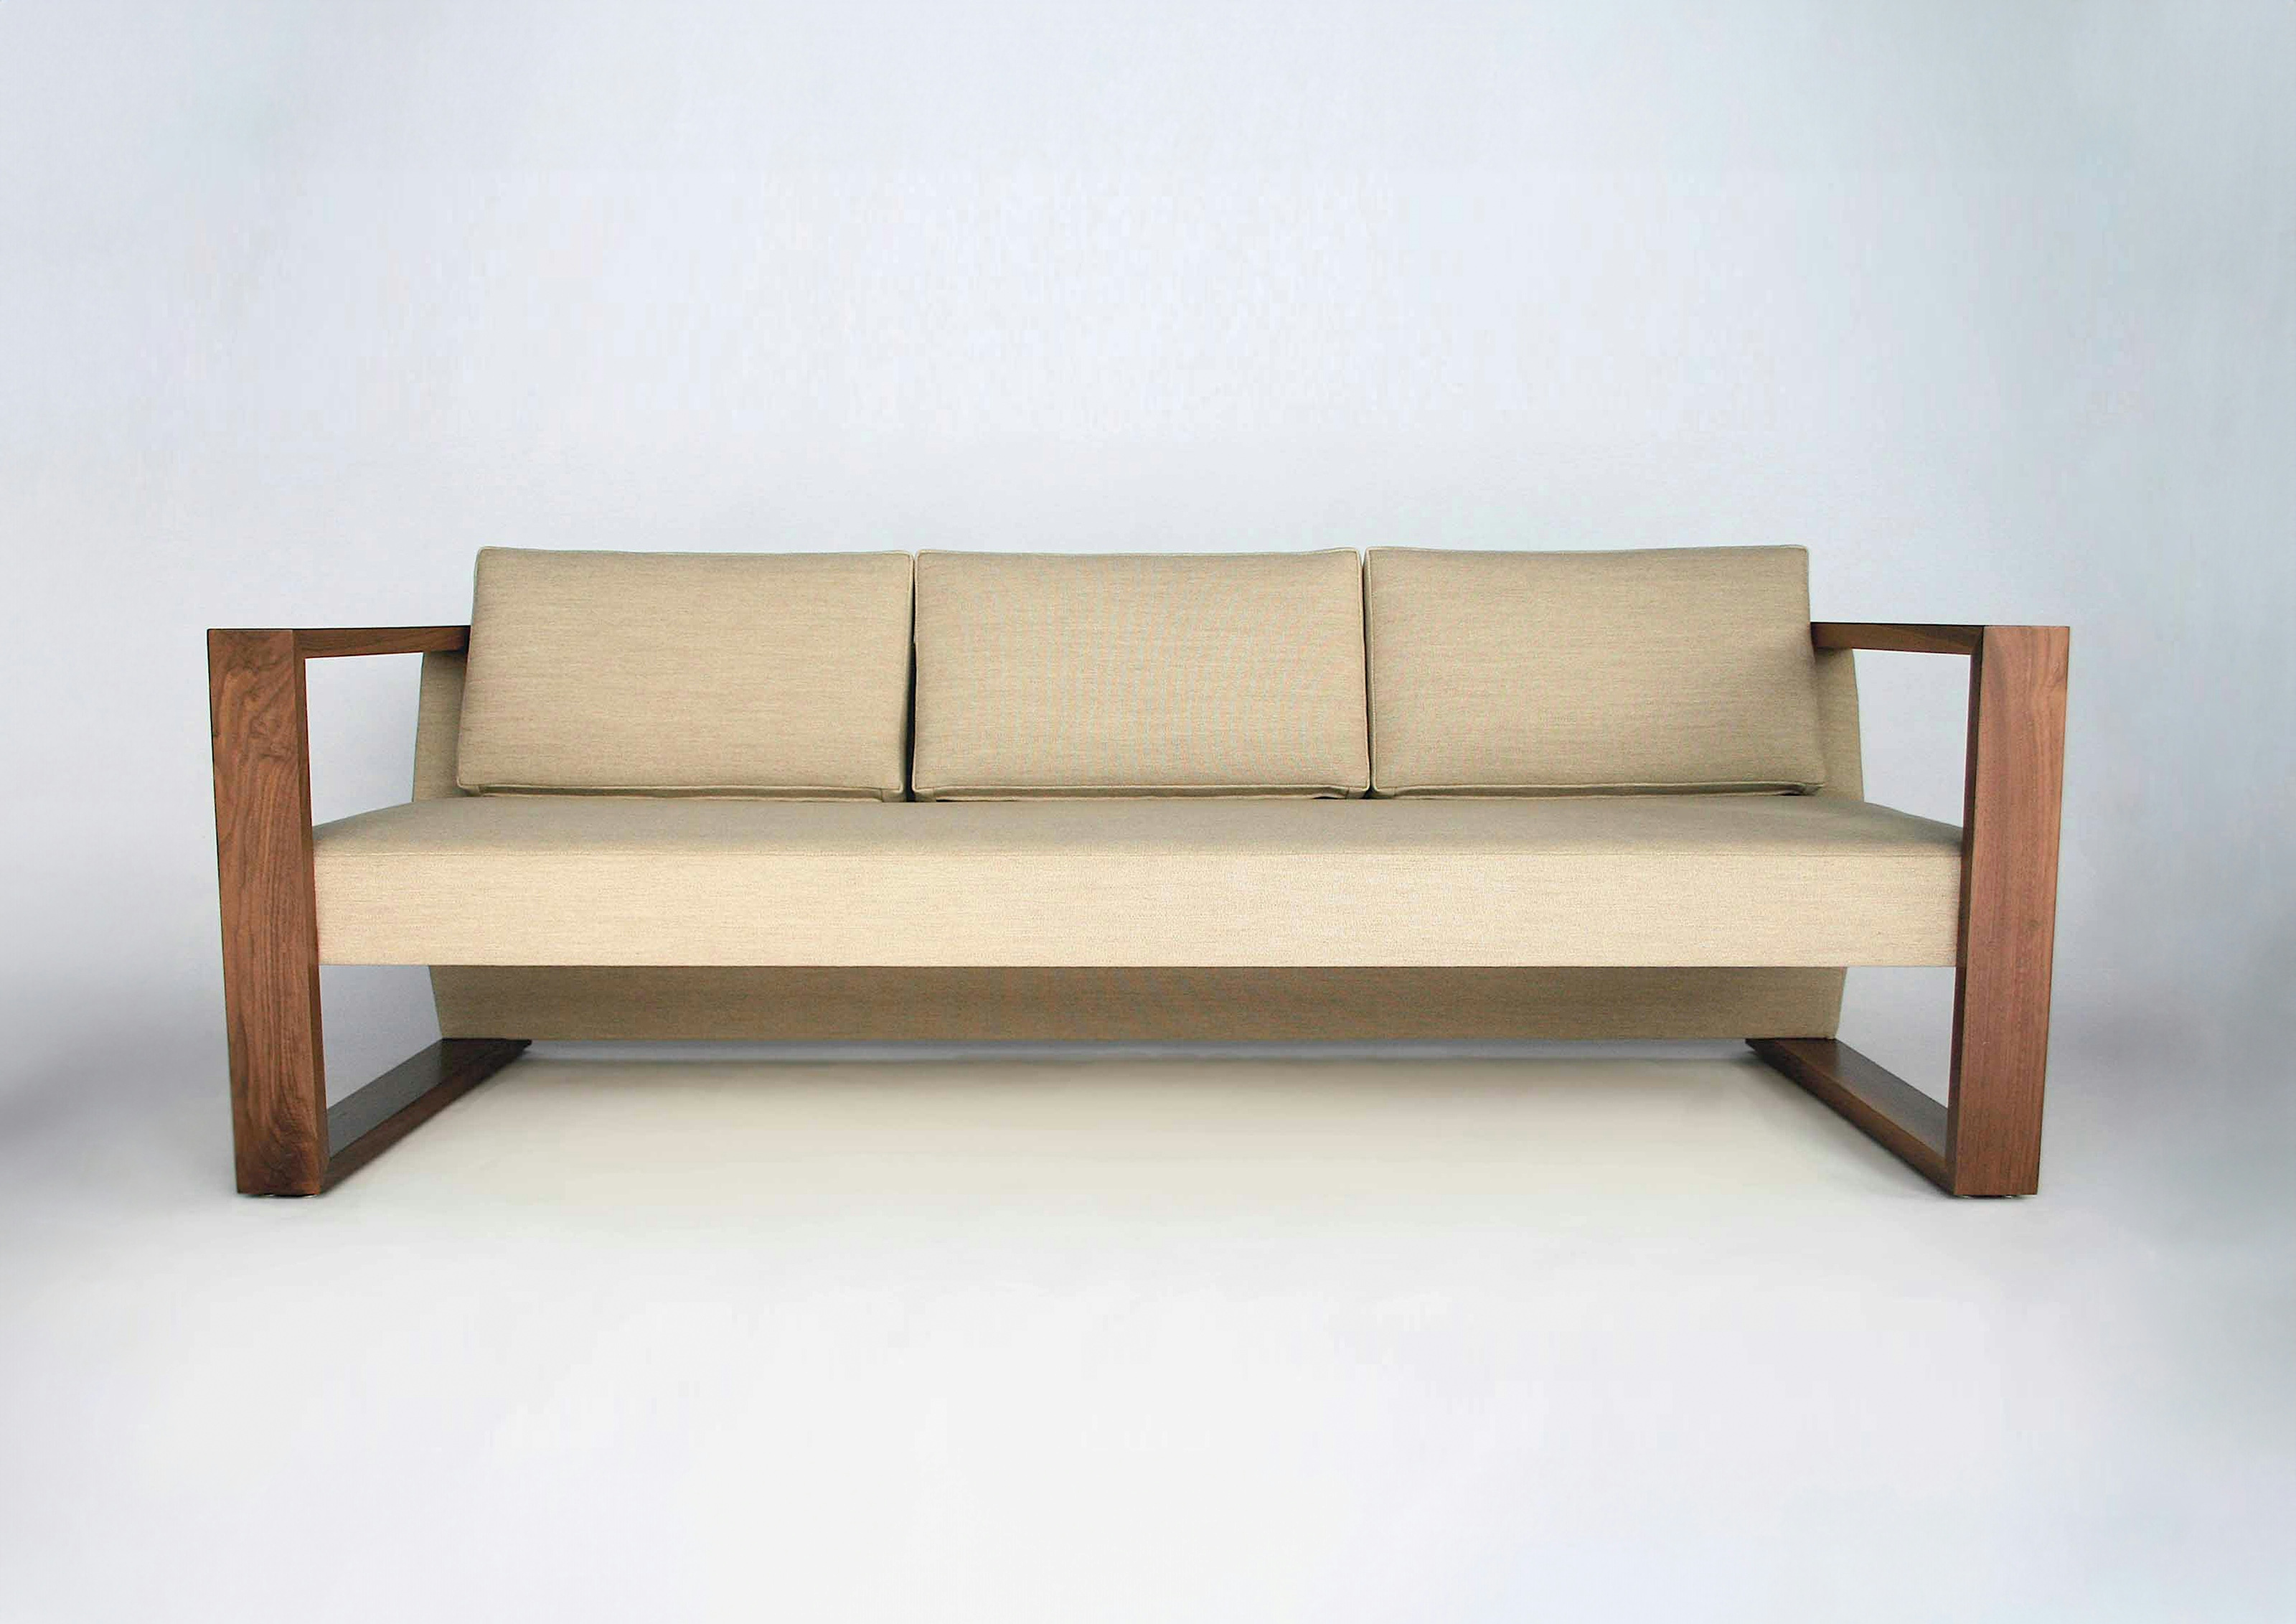 Phase Design Maxell Sofa Product Page